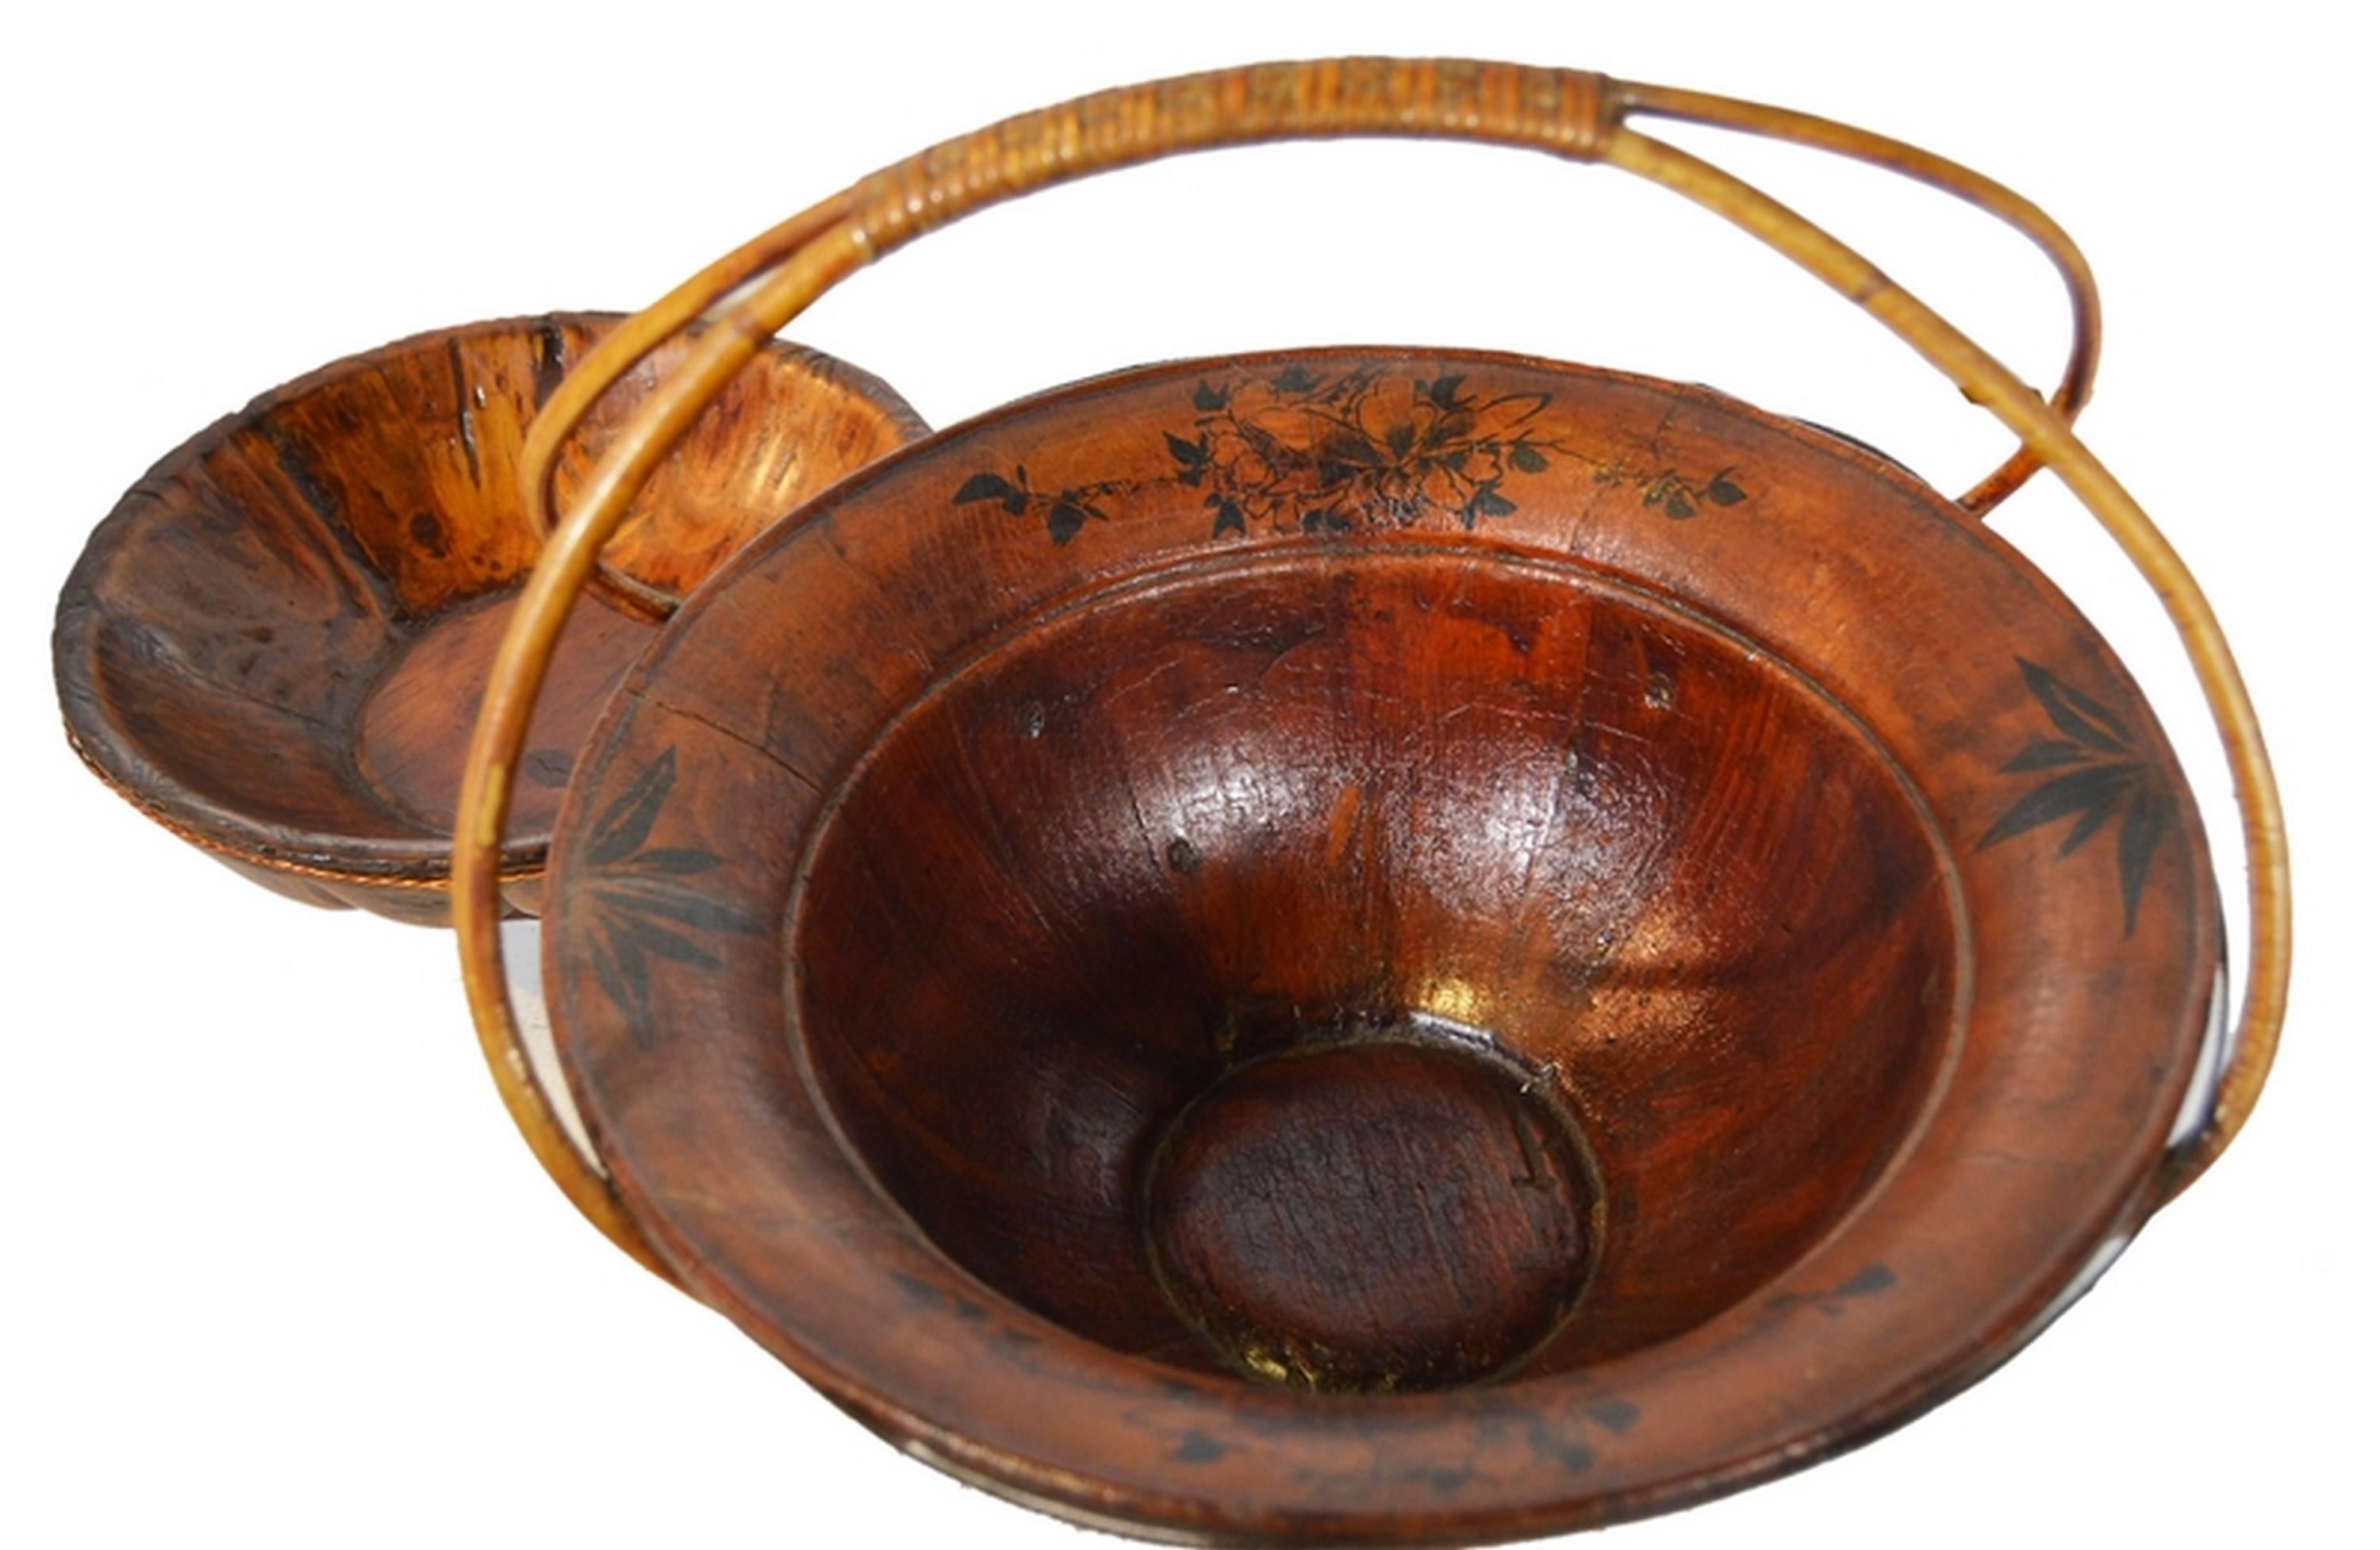 A 19th century Chinese painted hat basket made with varnished bamboo and gadroon motifs. This basket adopts a circular shape adorned with gadroons while two tall thin handles surmount the lid. On the inside, the edge of the basket is adorned with